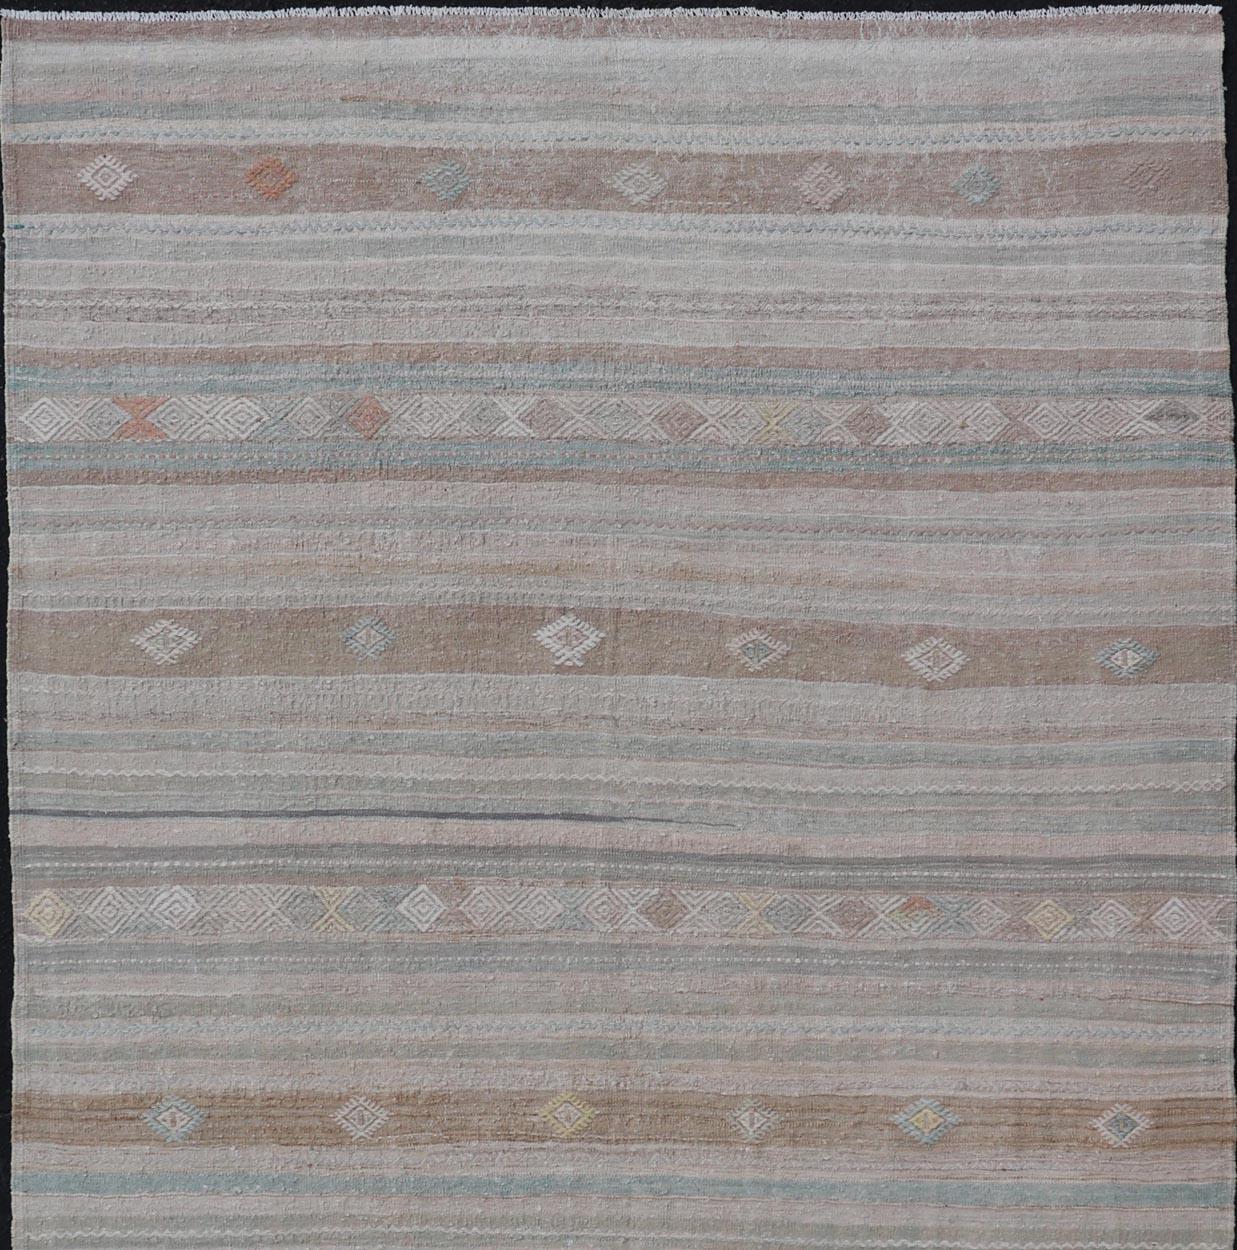 Turkish Flat-Weave Kilim with Embroideries in Taupe, Tan, Light Green, and Grey For Sale 2